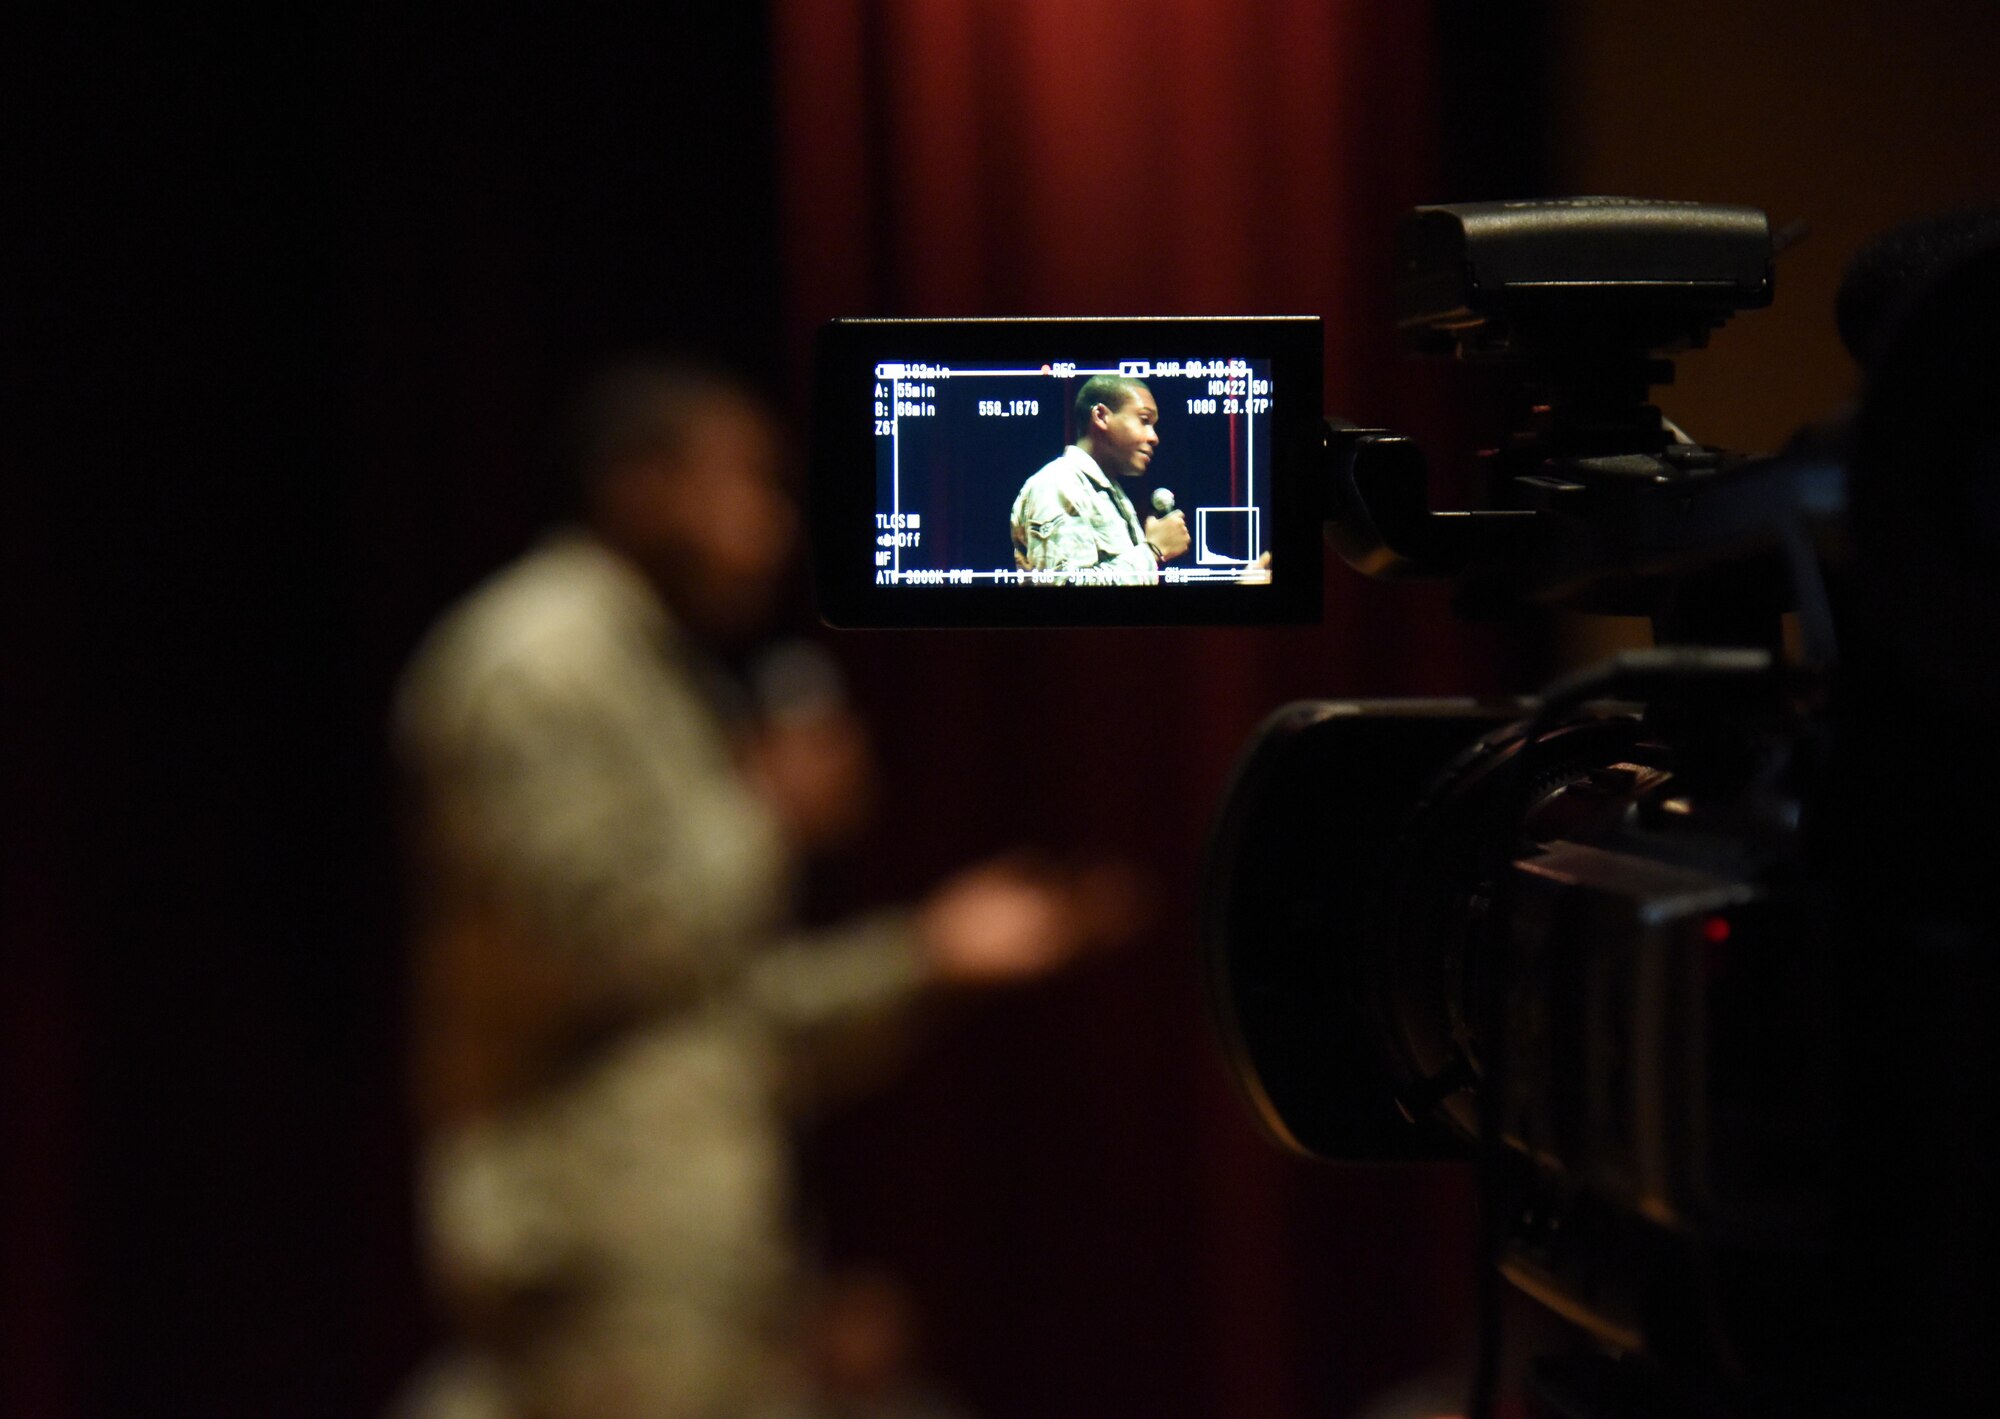 Airman 1st Class Rayan Paul, 81st Diagnostic and Therapeutics Squadron pharmacy technician, shares his story about overcoming an accident and being resilient during a Storytellers event at the Welch Theater Nov. 16, 2016, on Keesler Air Force Base, Miss. The event, consisting of three speakers, was one of several events held throughout Dragon Week, which focuses resiliency and teambuilding initiatives across the base. (U.S. Air Force photo by Kemberly Groue/Released)